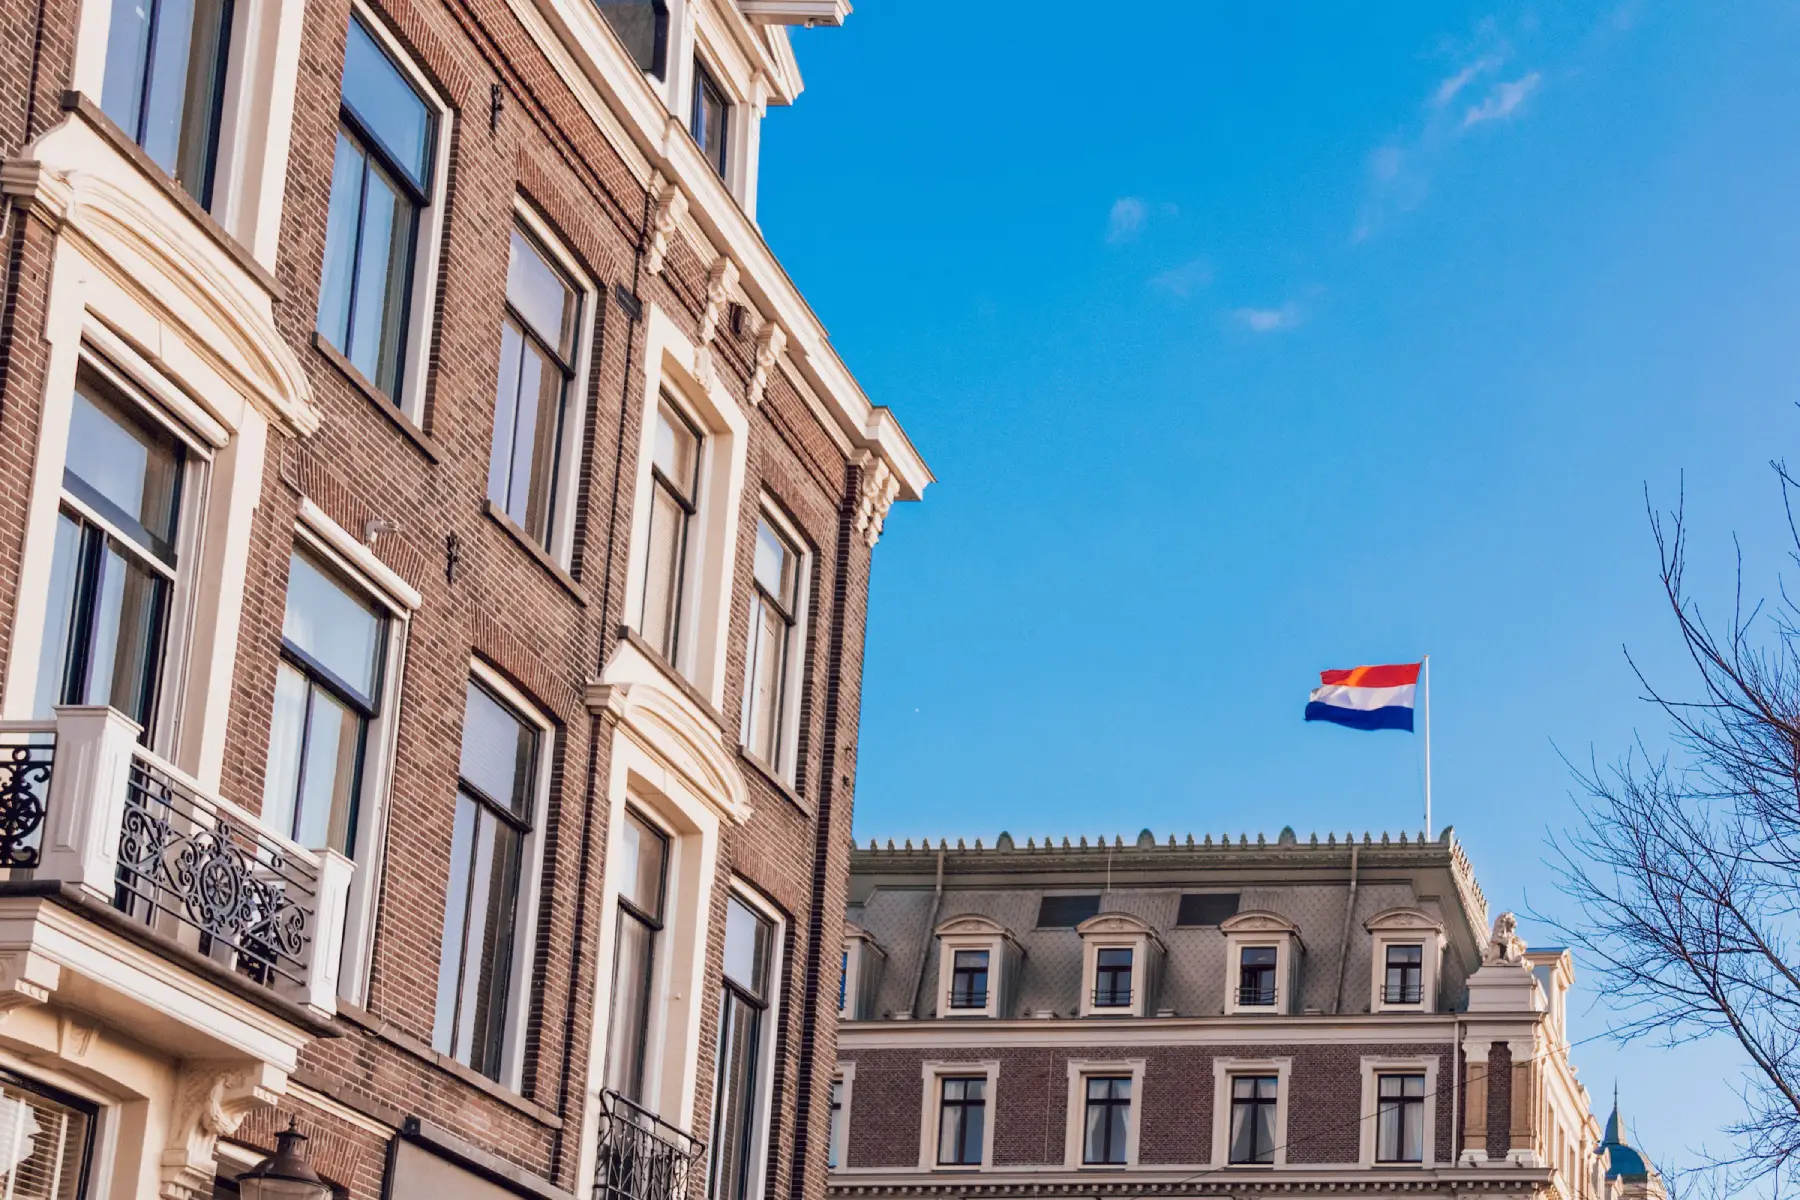 Apartment buildings in Amsterdam with Dutch flag flying on mast